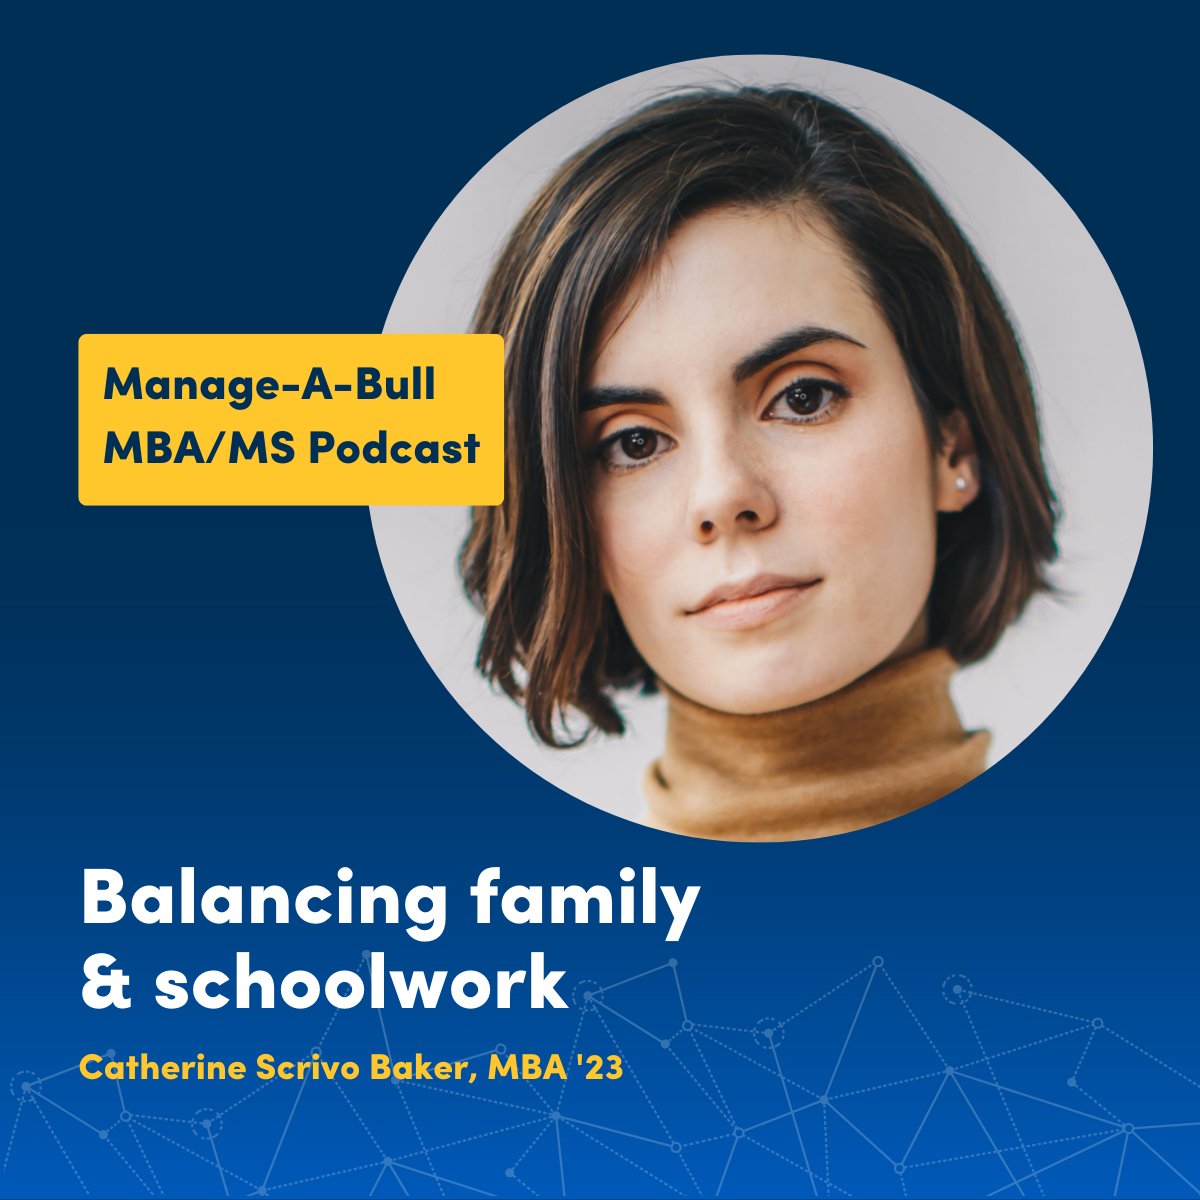 Catherine Scrivo Baker shares some tips on balancing family and schoolwork in this week's Manage-A-Bull Podcast. 

Listen to our conversation here - bit.ly/3FDKAeJ
#UBMBA